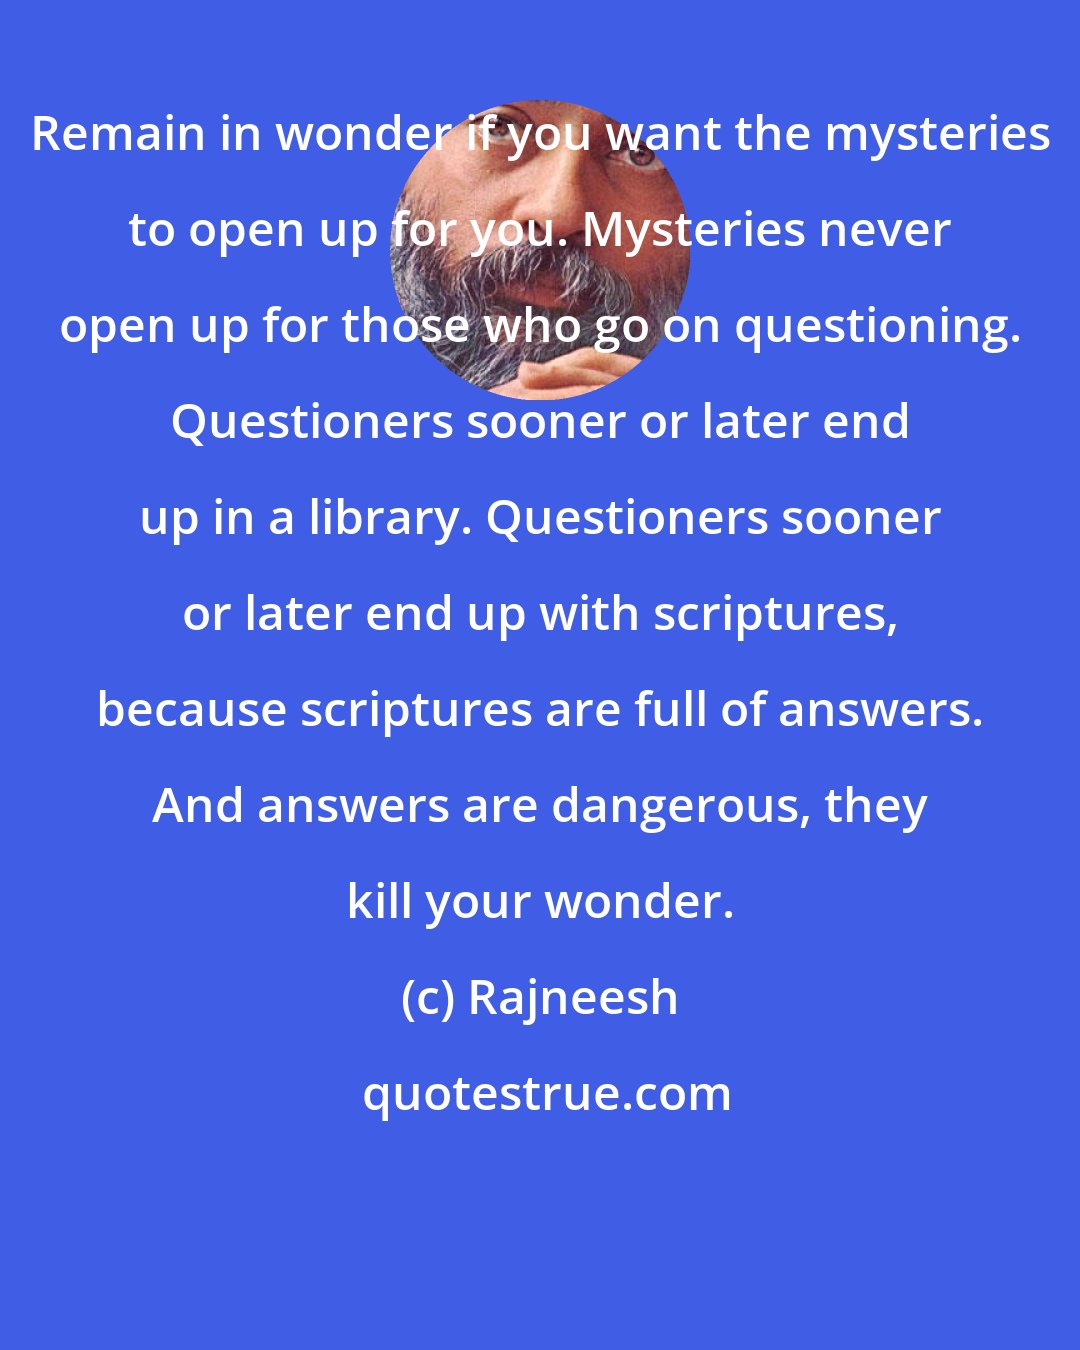 Rajneesh: Remain in wonder if you want the mysteries to open up for you. Mysteries never open up for those who go on questioning. Questioners sooner or later end up in a library. Questioners sooner or later end up with scriptures, because scriptures are full of answers. And answers are dangerous, they kill your wonder.